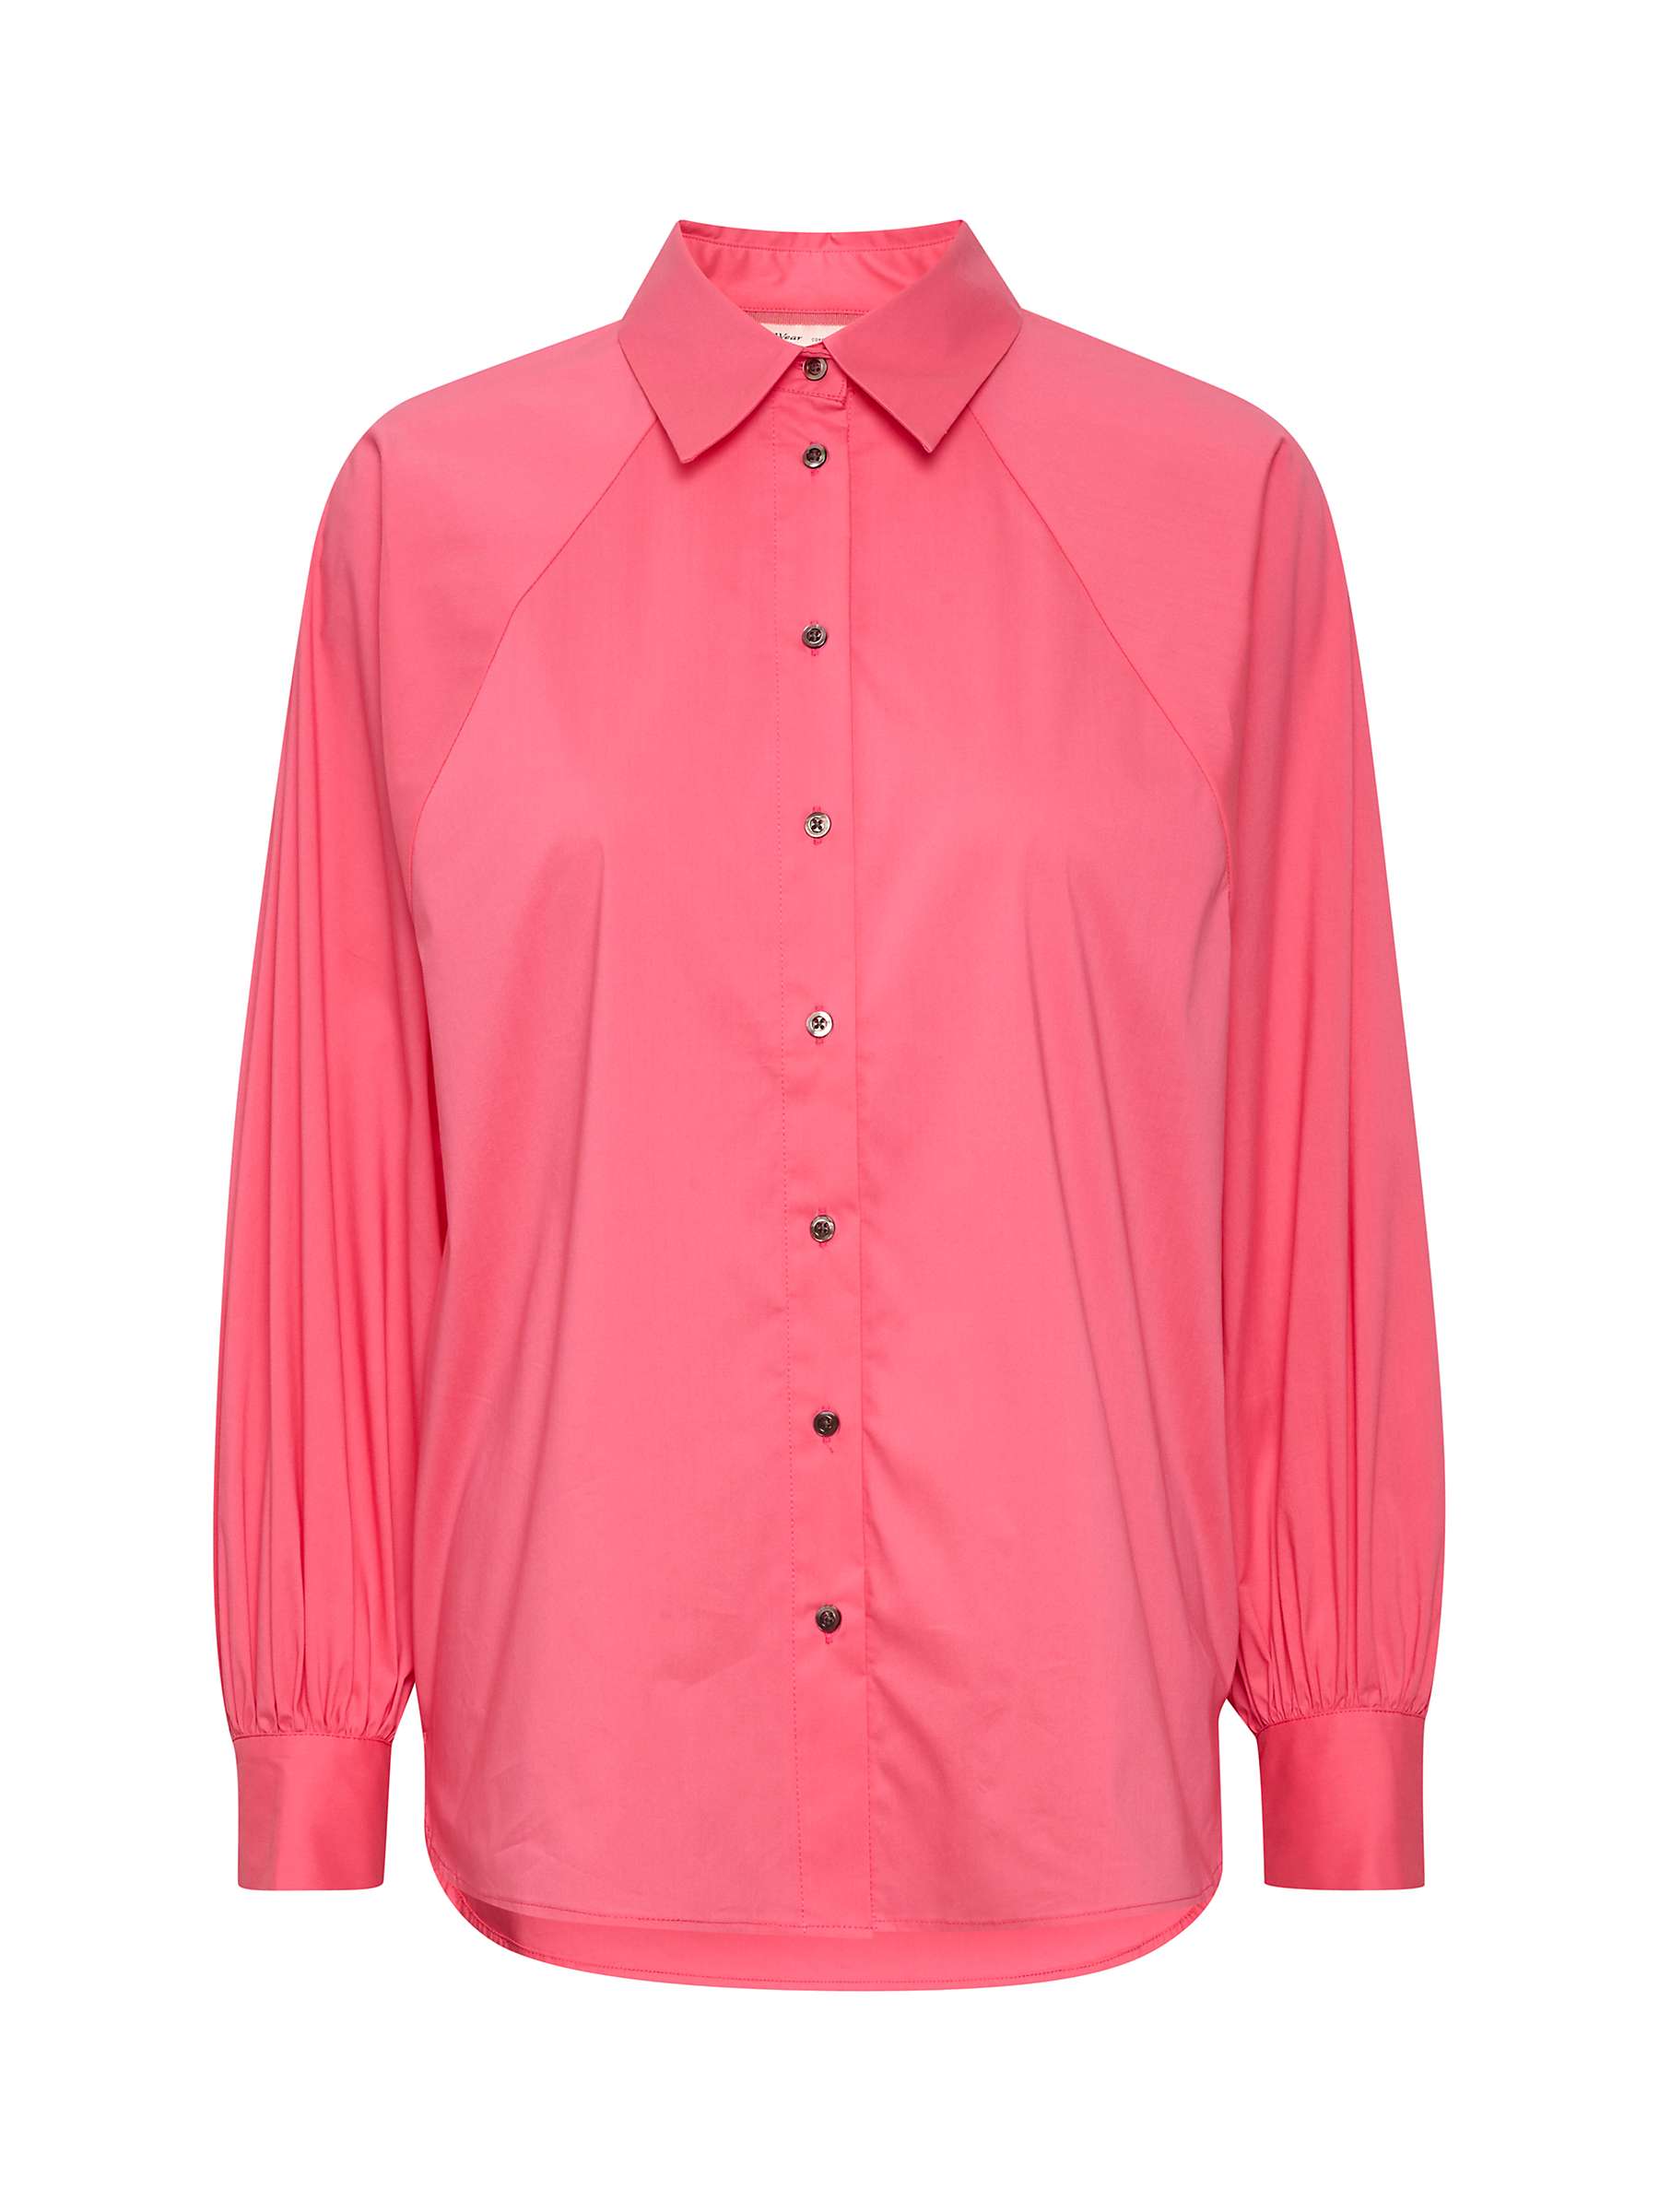 Buy InWear Dilliam Relaxed Fit Long Sleeve Shirt Online at johnlewis.com